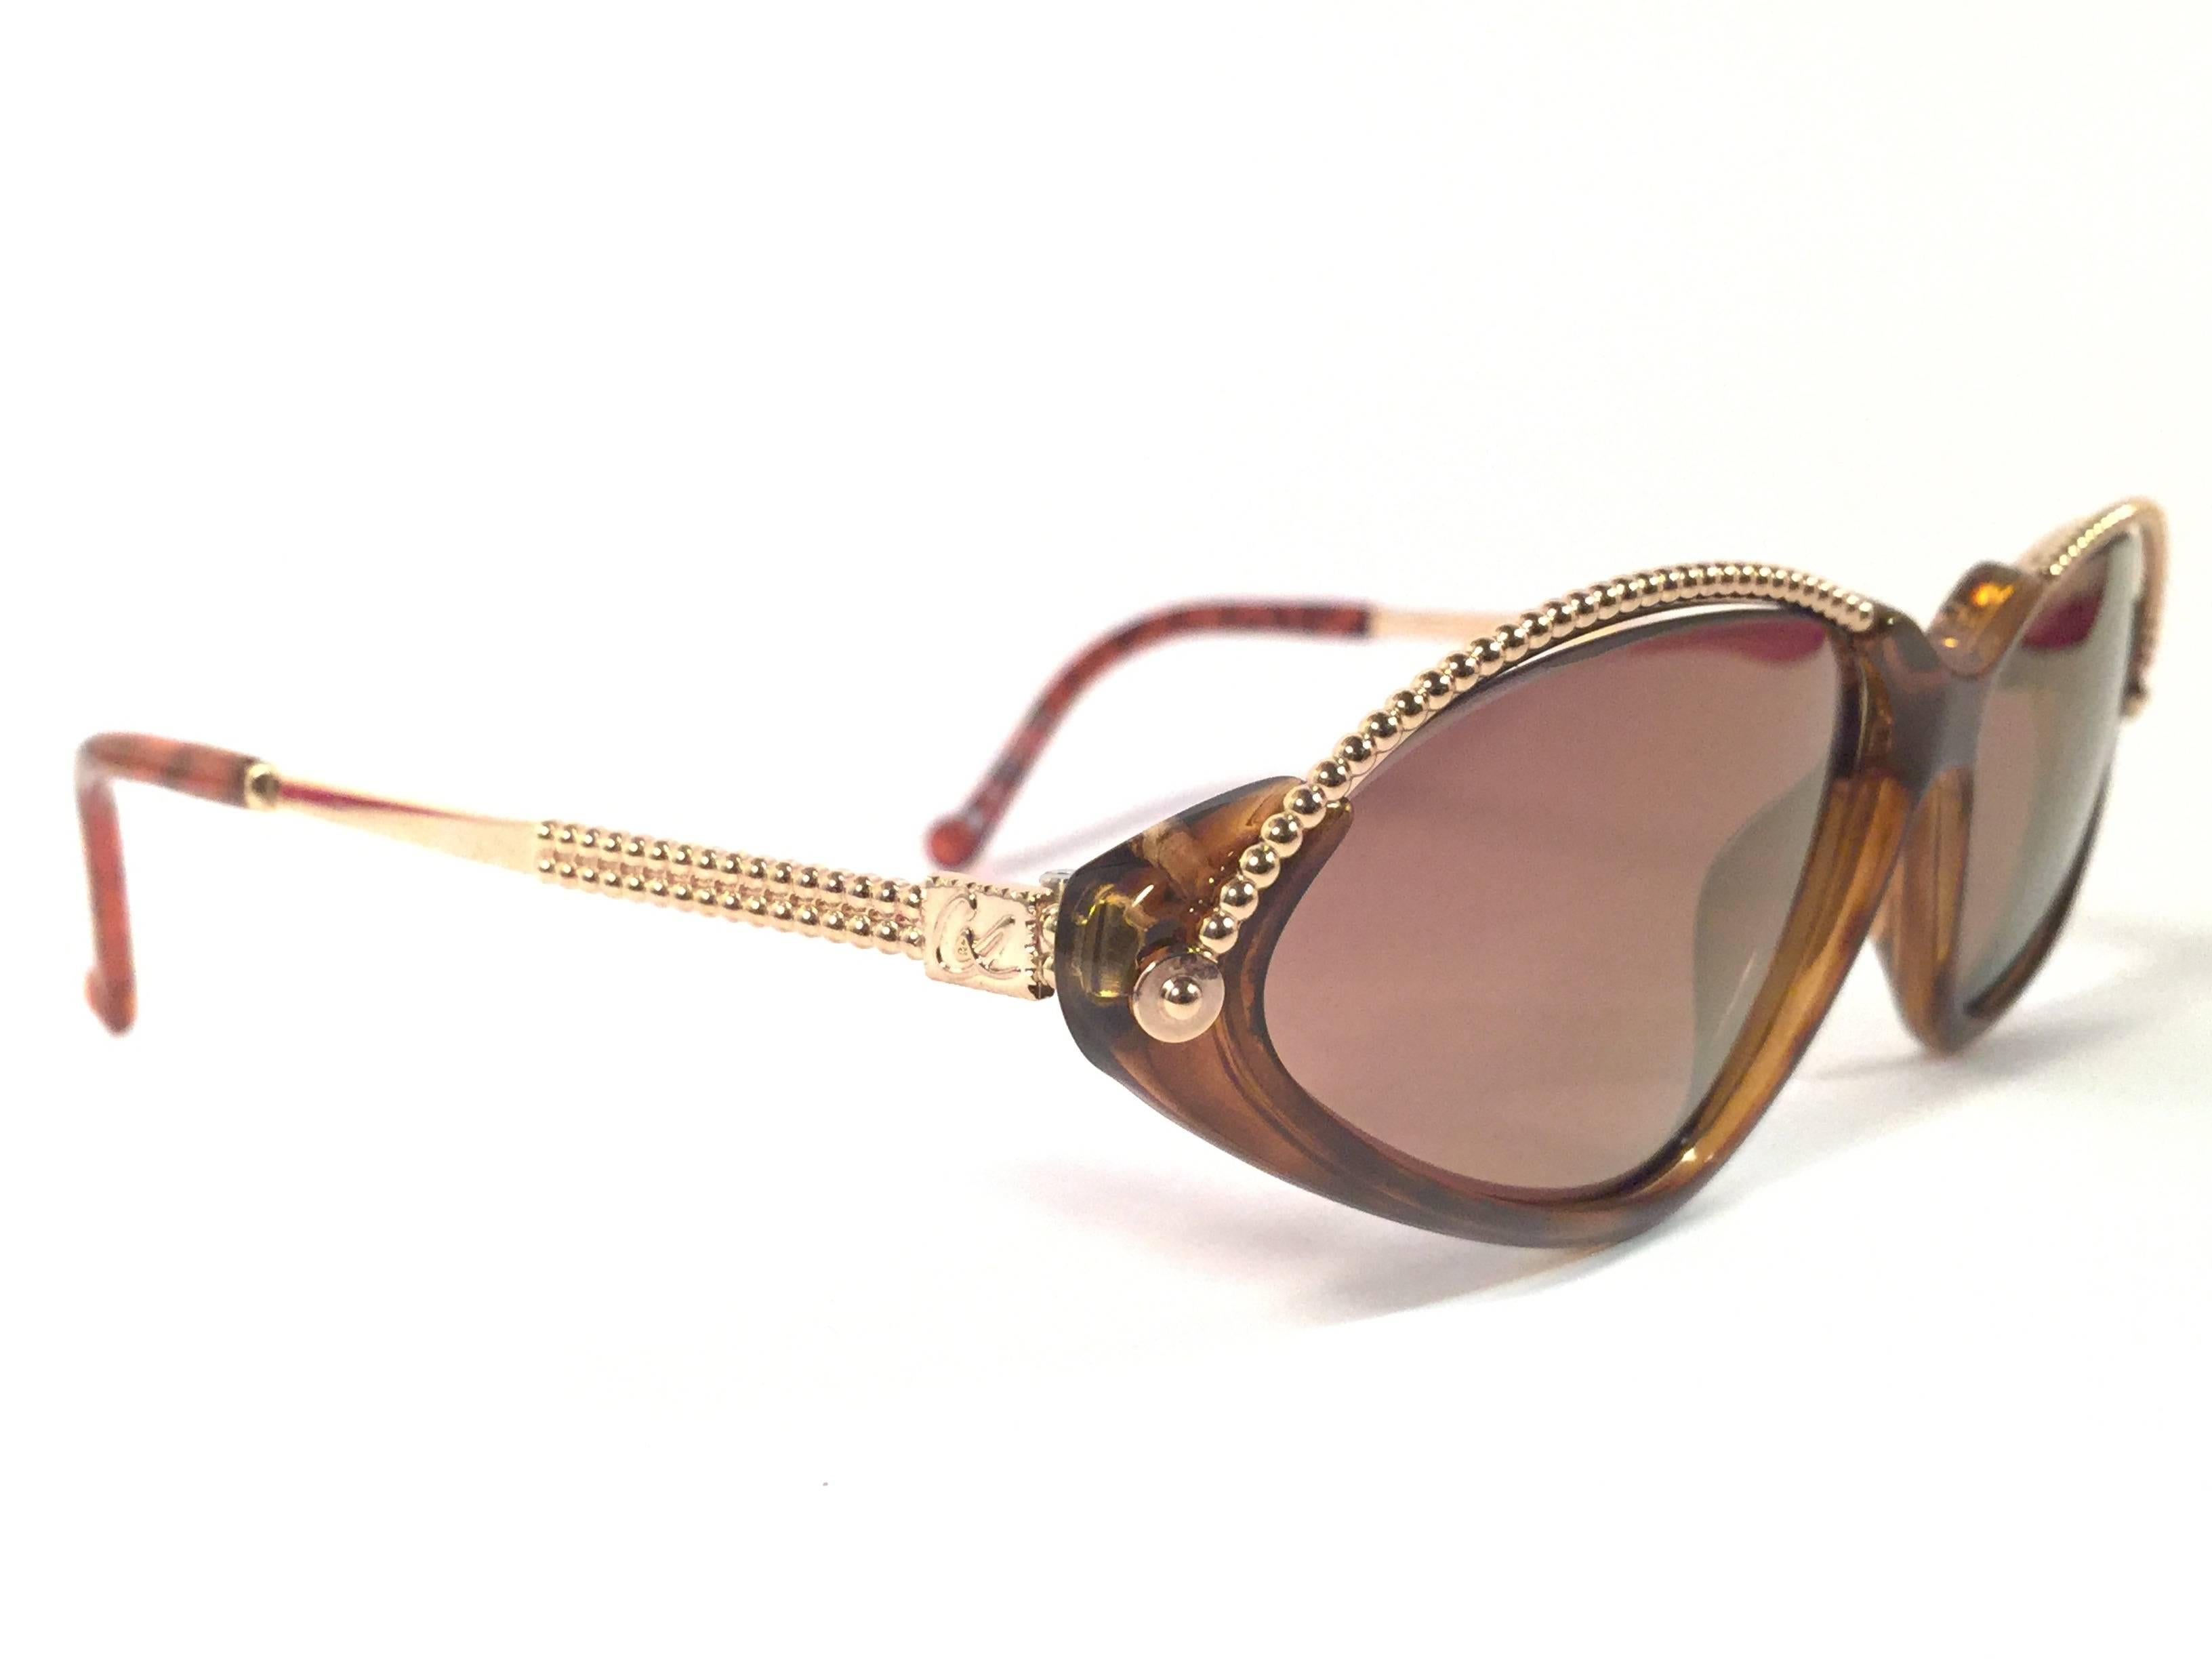 Rare pair of New vintage Christian Lacroix sunglasses. 

Tortoise with elaborated gold accents, cat eyed shaped frame holding a pair of spotless dark amber lenses.

New, never worn or displayed. Made in France.

FRONT : 14 CMS

LENS HEIGHT : 3.5